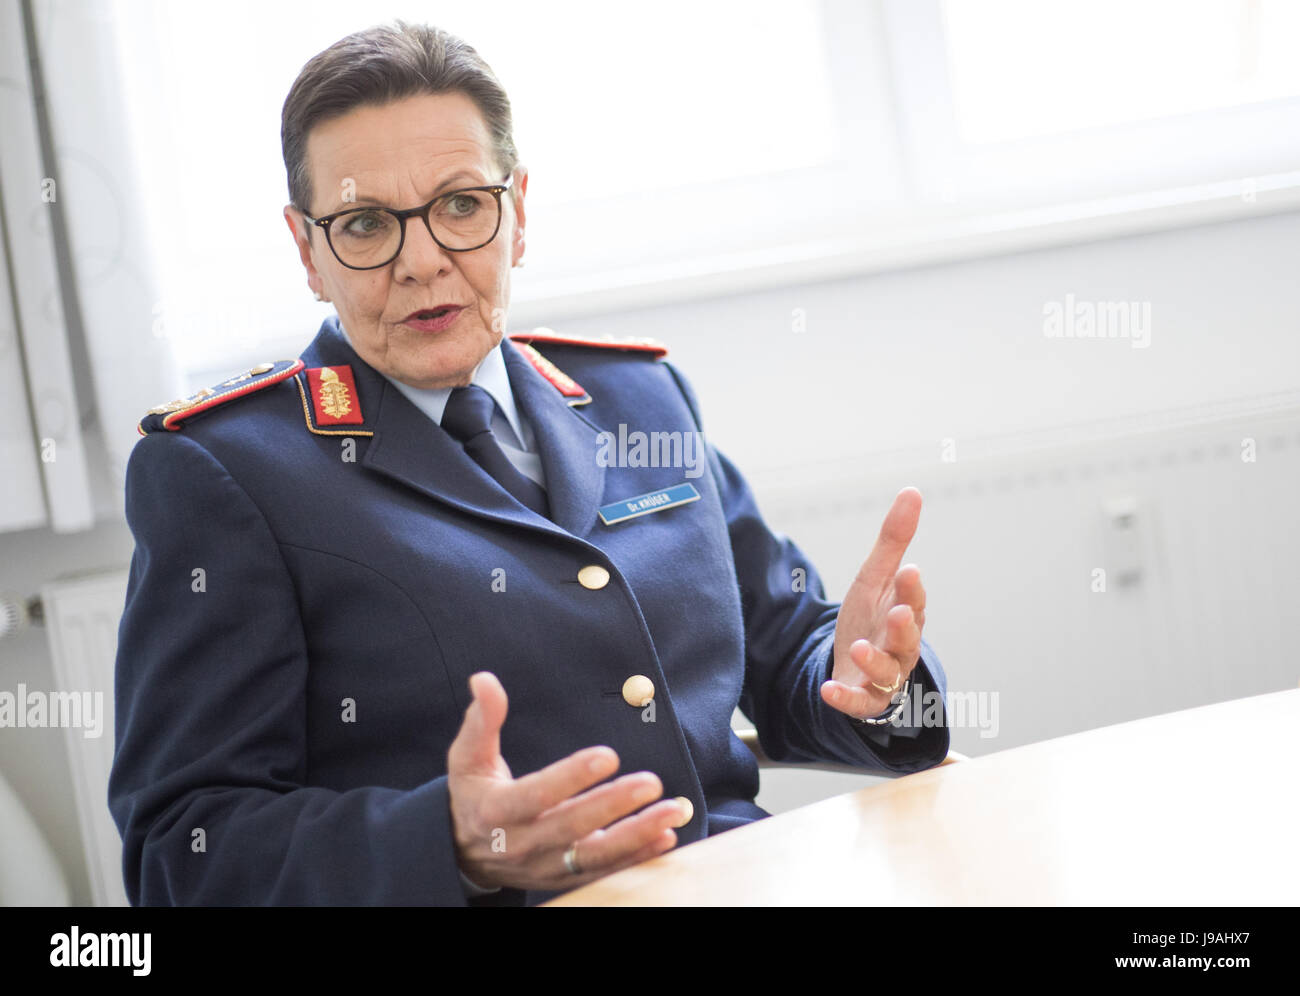 Berlin, Germany. 01st June, 2017. Gesine Krueger, Surgeon General and commanding officer of the Medical Academy of the German Armed Forces, speaks at the symposium 'Auf dem Weg zur Generalinspekteurin?' (lit. On the way to becoming the female Inspector General?) in Berlin, Germany, 01 June 2017. Krueger is currently the highest-ranking female officer serving in the German Armed Forces. Photo: Jörg Carstensen/dpa/Alamy Live News Stock Photo